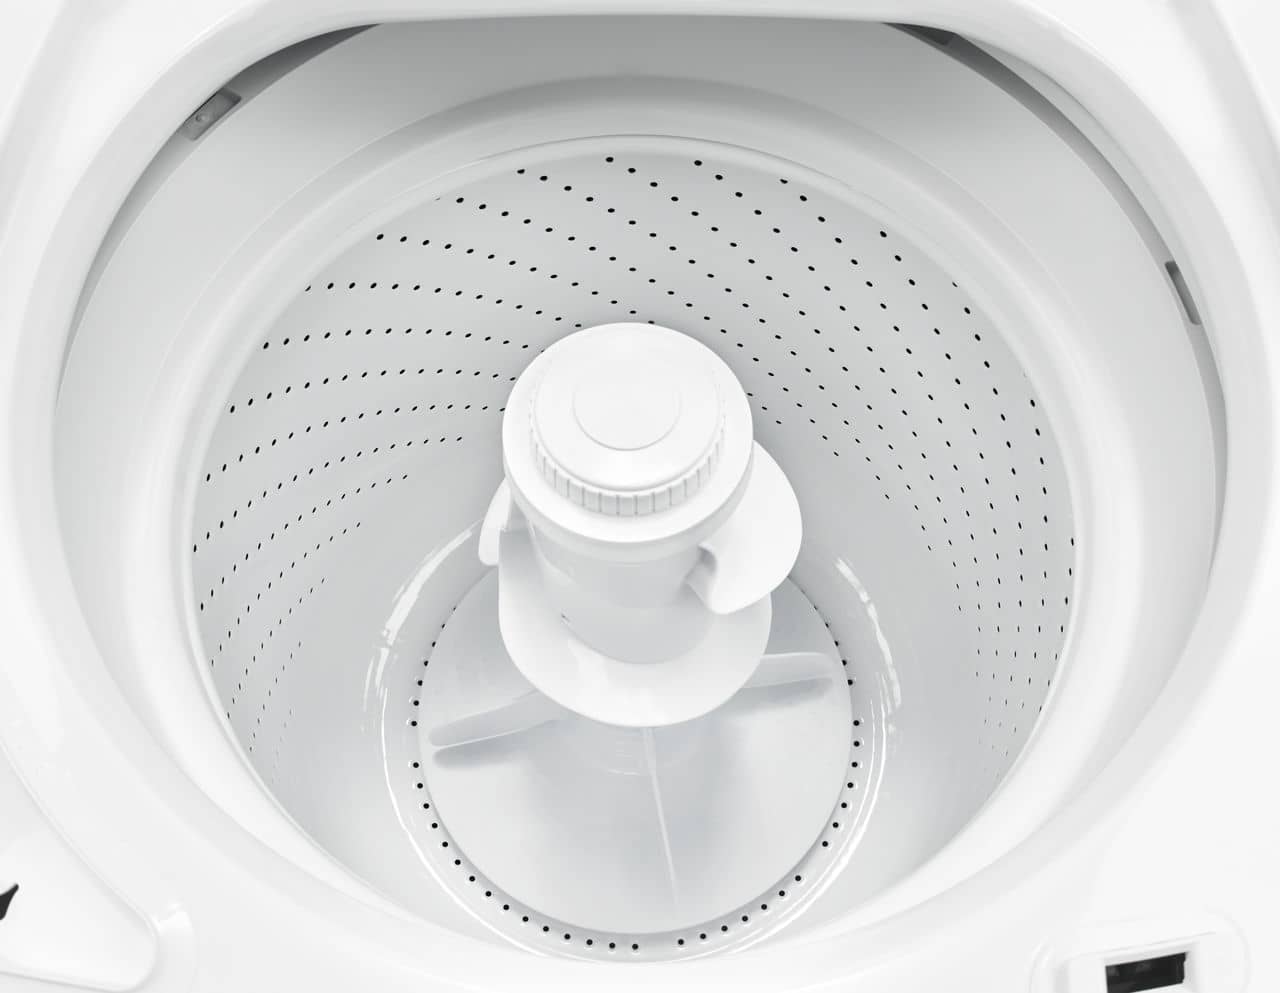 Washer Stopped Mid Cycle: 6 Easy Ways to Fix It Now